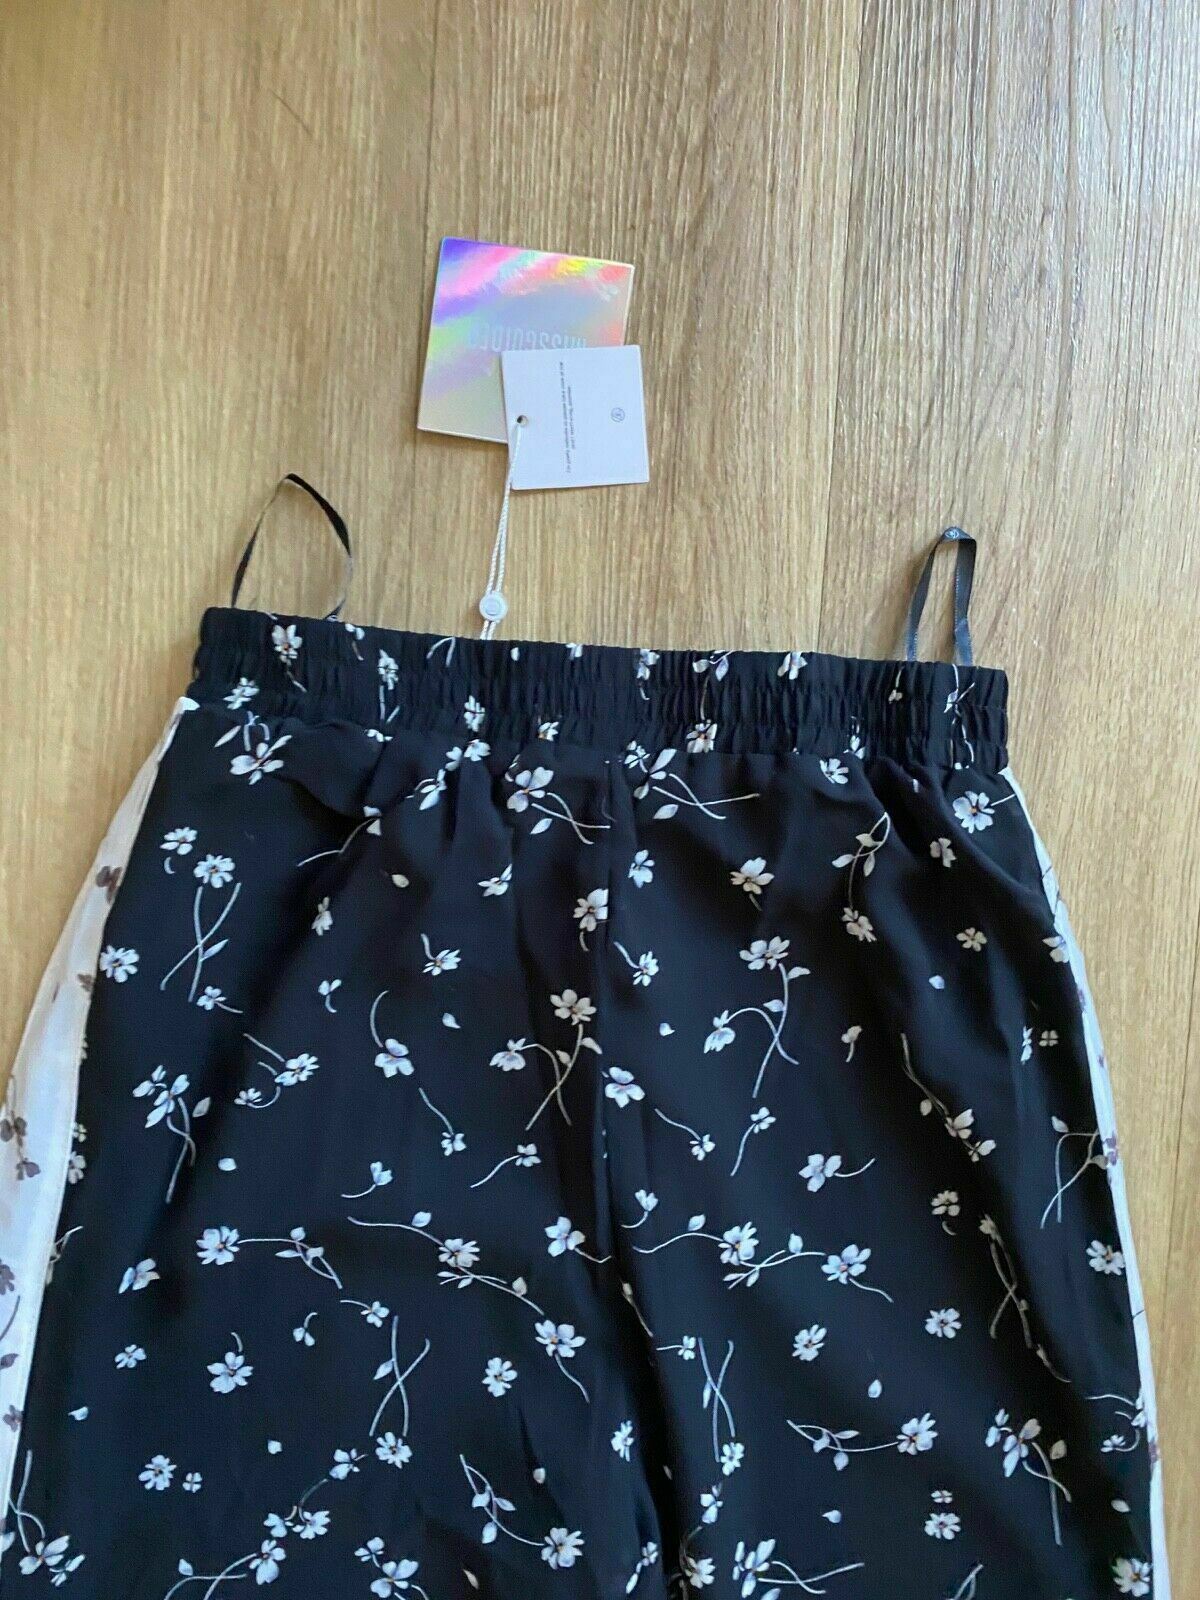 Missguided Tall Wide Leg Floral Trouser Size 8 Chiffon Layered Black White